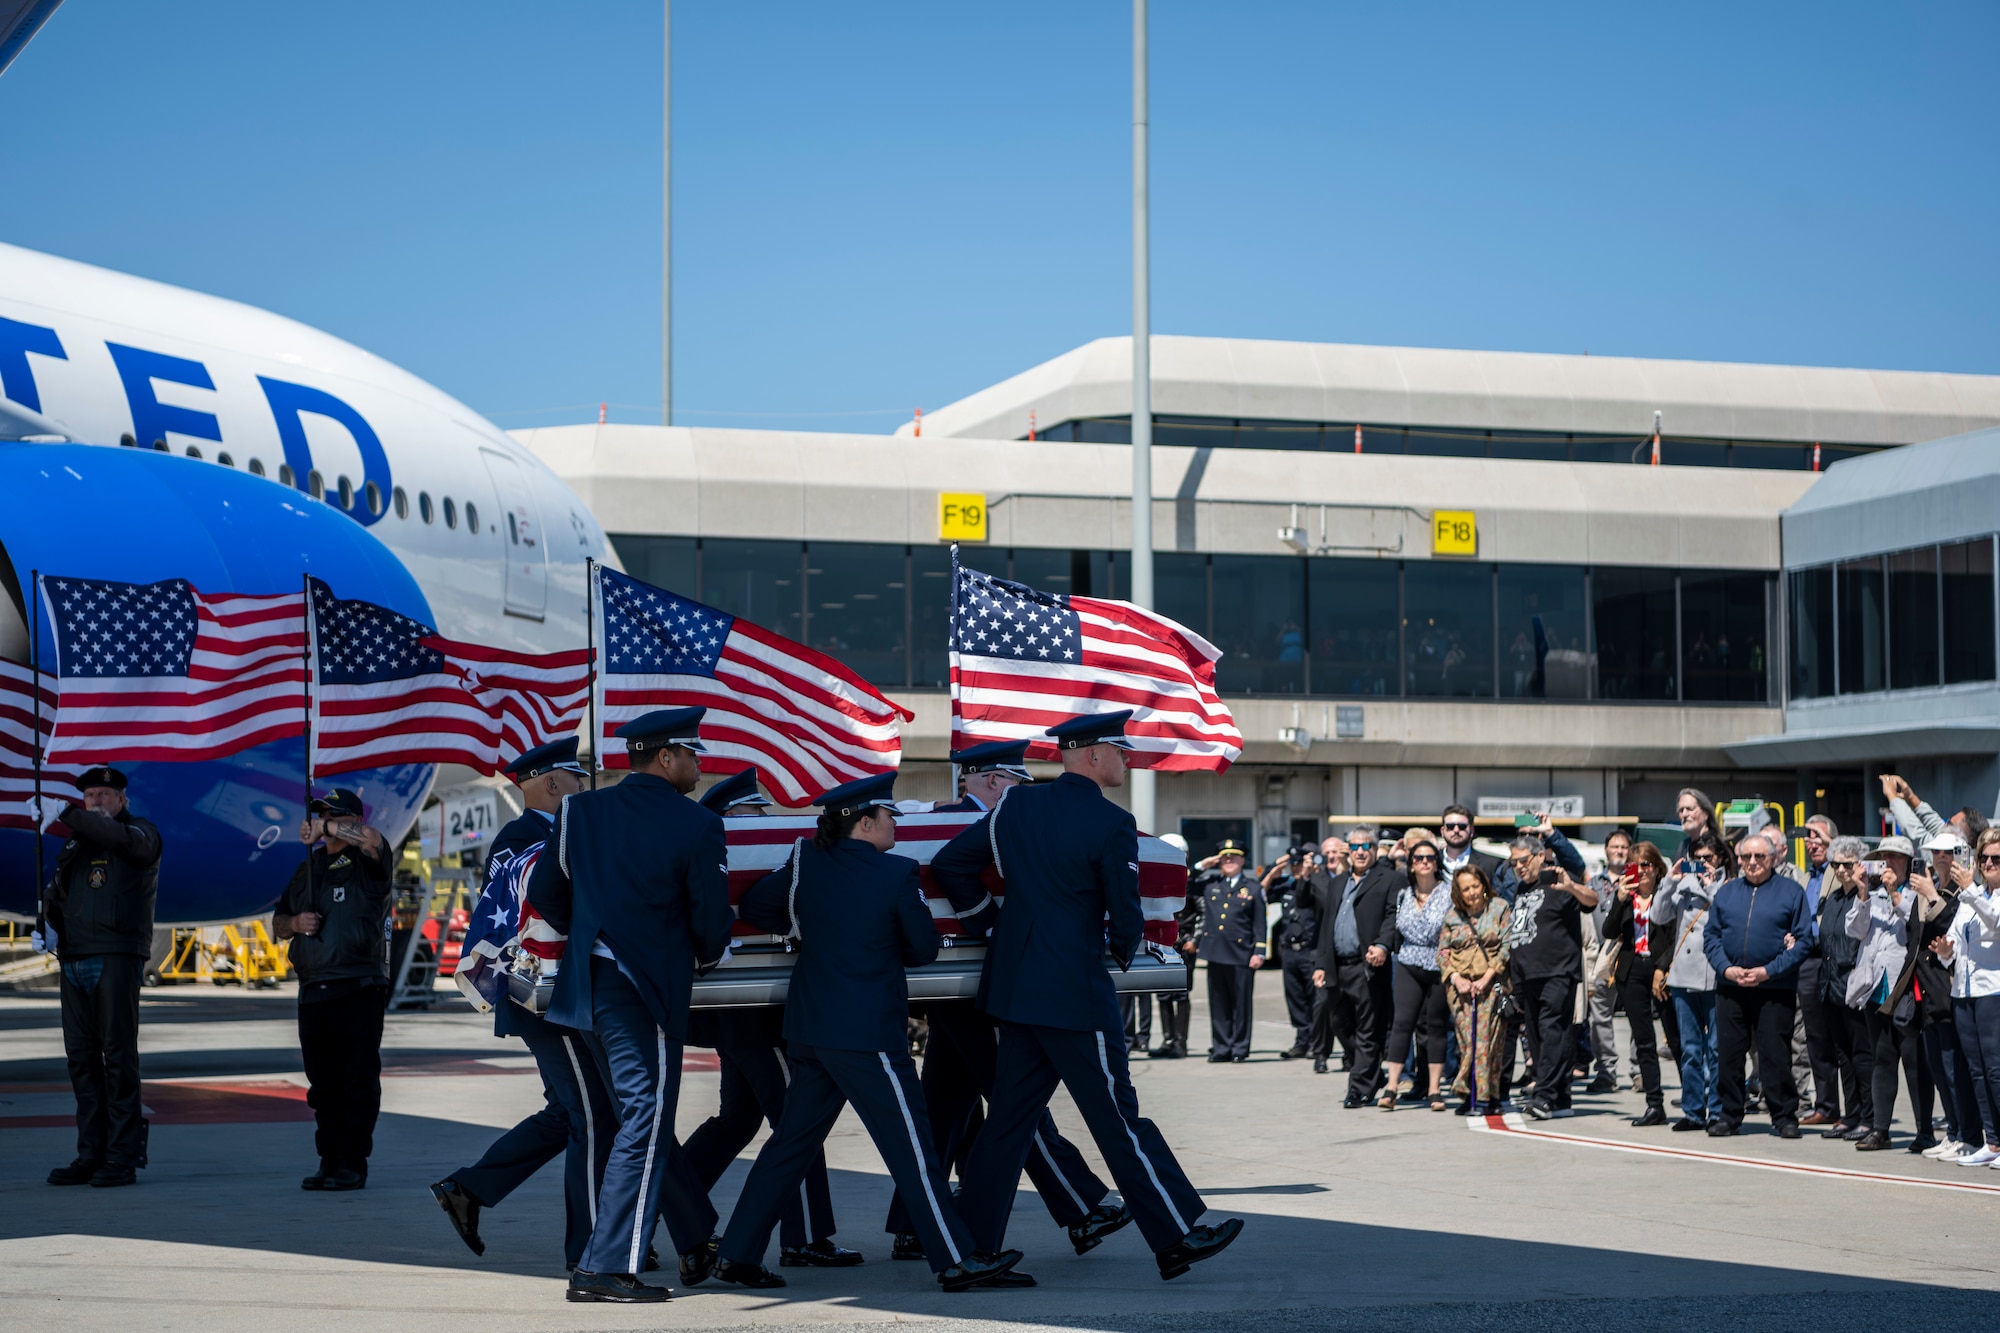 U.S. Airmen from the Travis Air Force Base Honor Guard carry the casket of U.S. Air Force Col. Ernest De Soto during his dignified arrival at San Francisco International Airport June 29, 2023. De Soto was killed in 1969 when his plane crashed into a mountain ridge during the Vietnam War. His remains were discovered in 1995, but it took more than 20 years for the Defense POW/MIA Accounting Agency (DPAA) to recover, identify and return them to his family in the Bay Area. (U.S. Air Force photo by Nicholas Pilch)